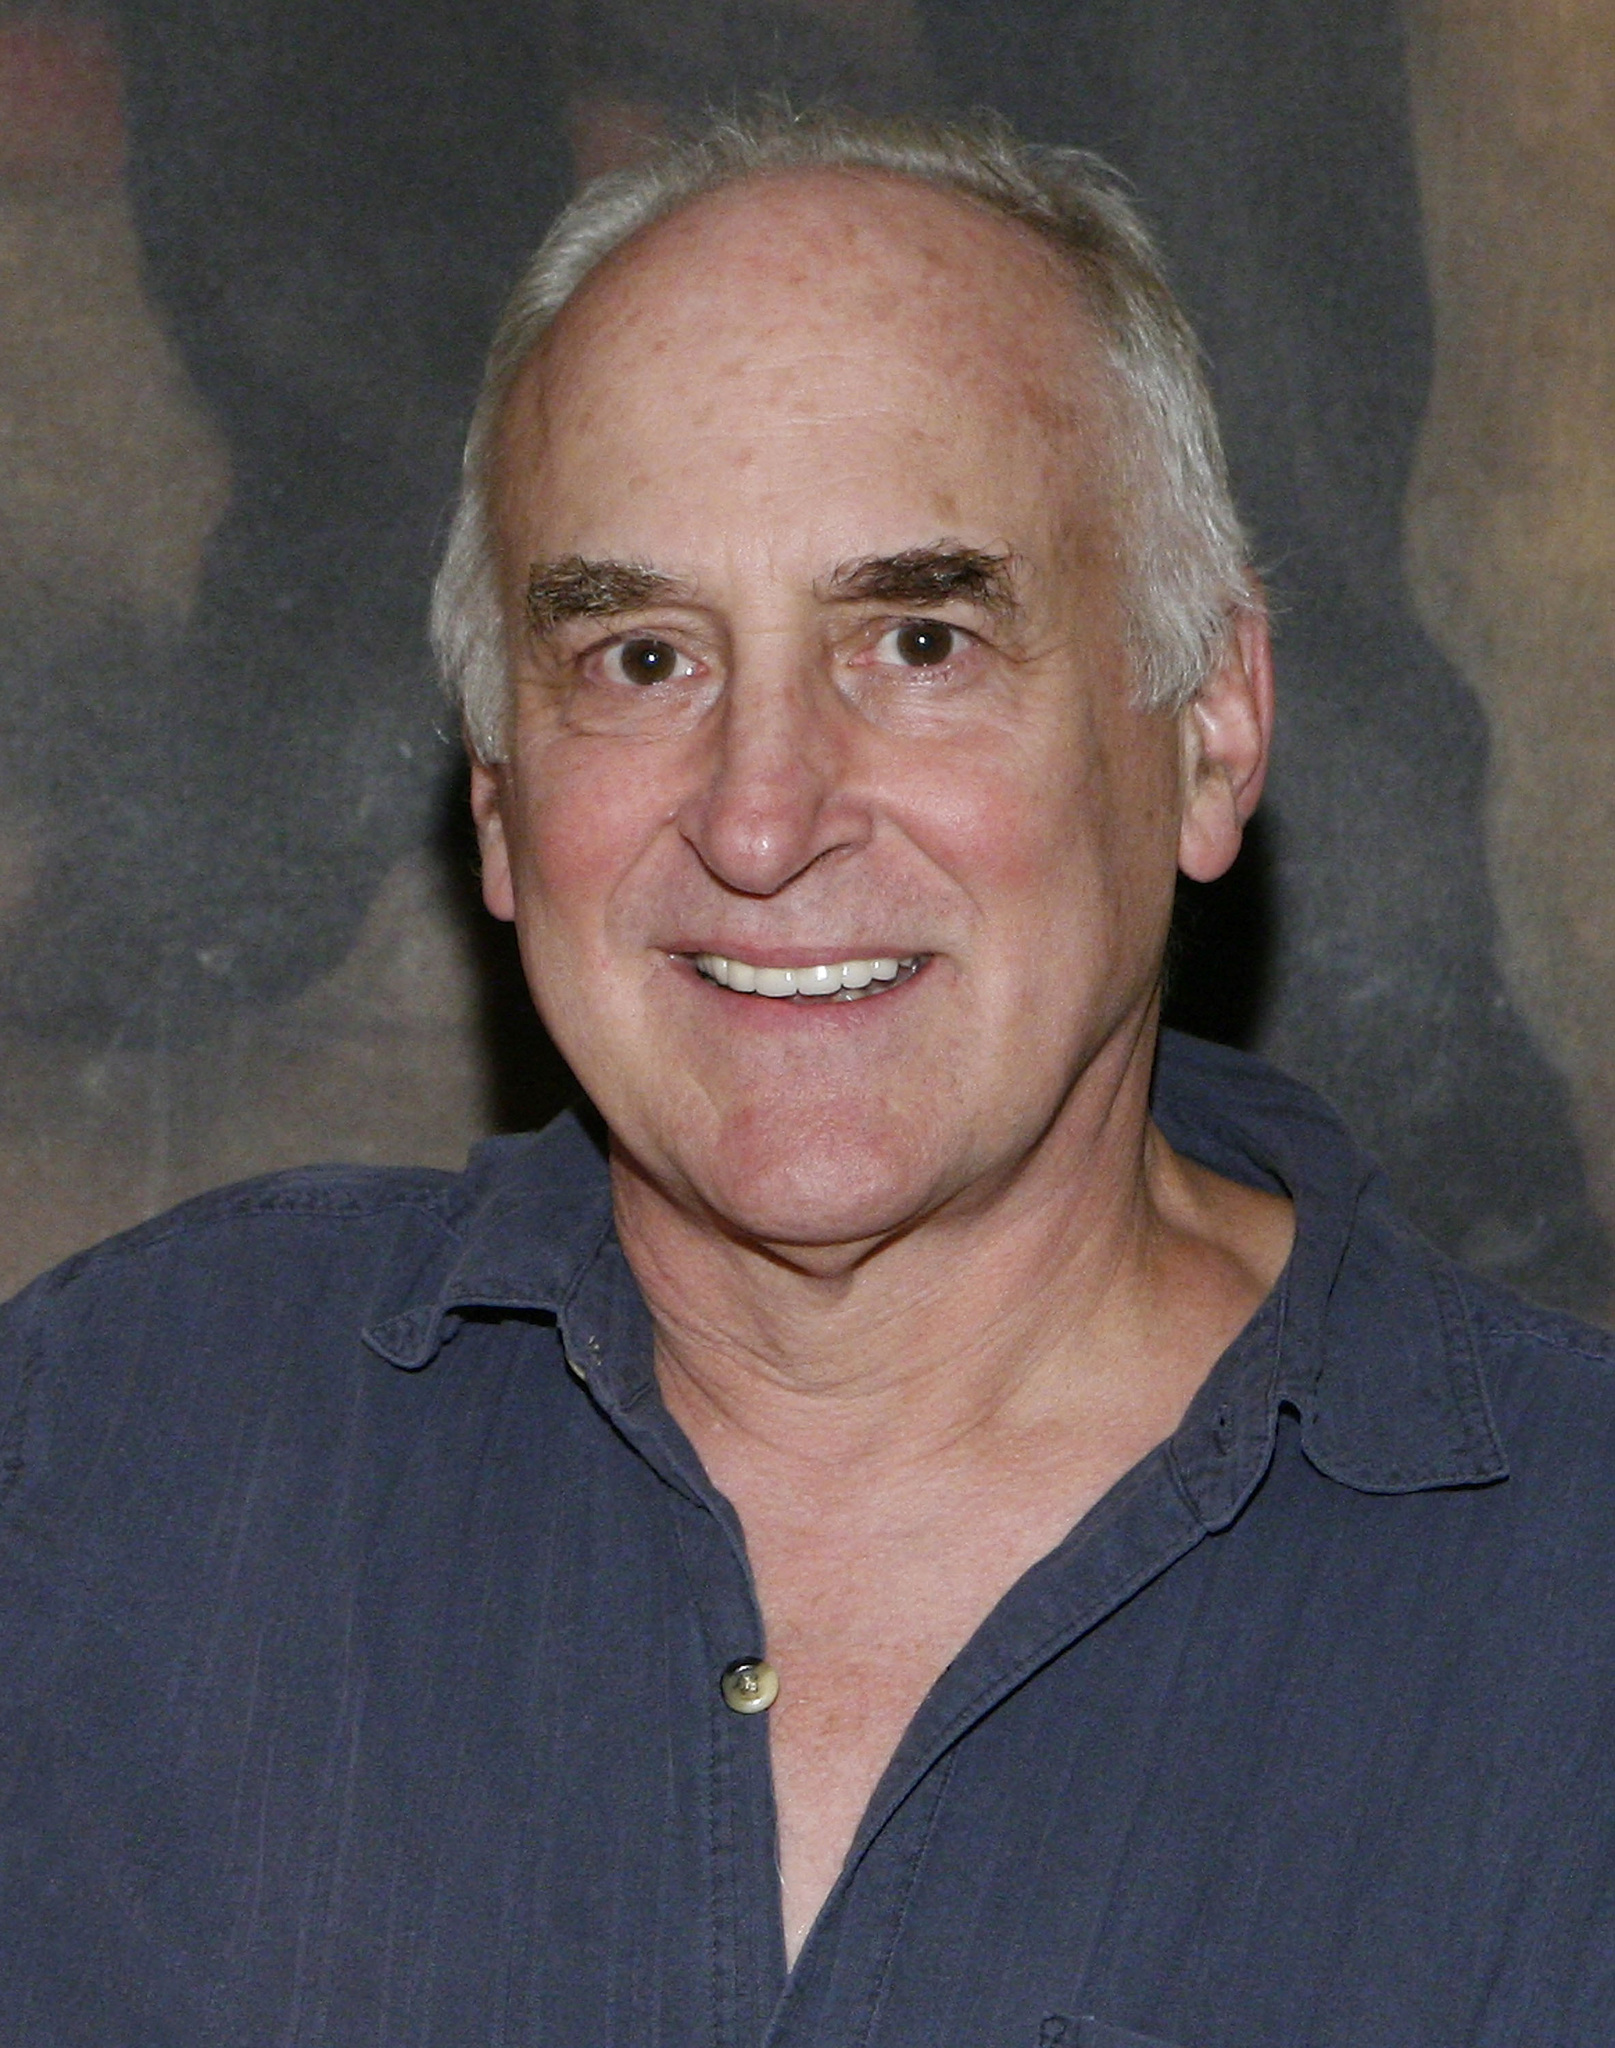 Jeffrey DeMunn attends the 'King Lear' Benefit Reading at The Players Club in New York City.